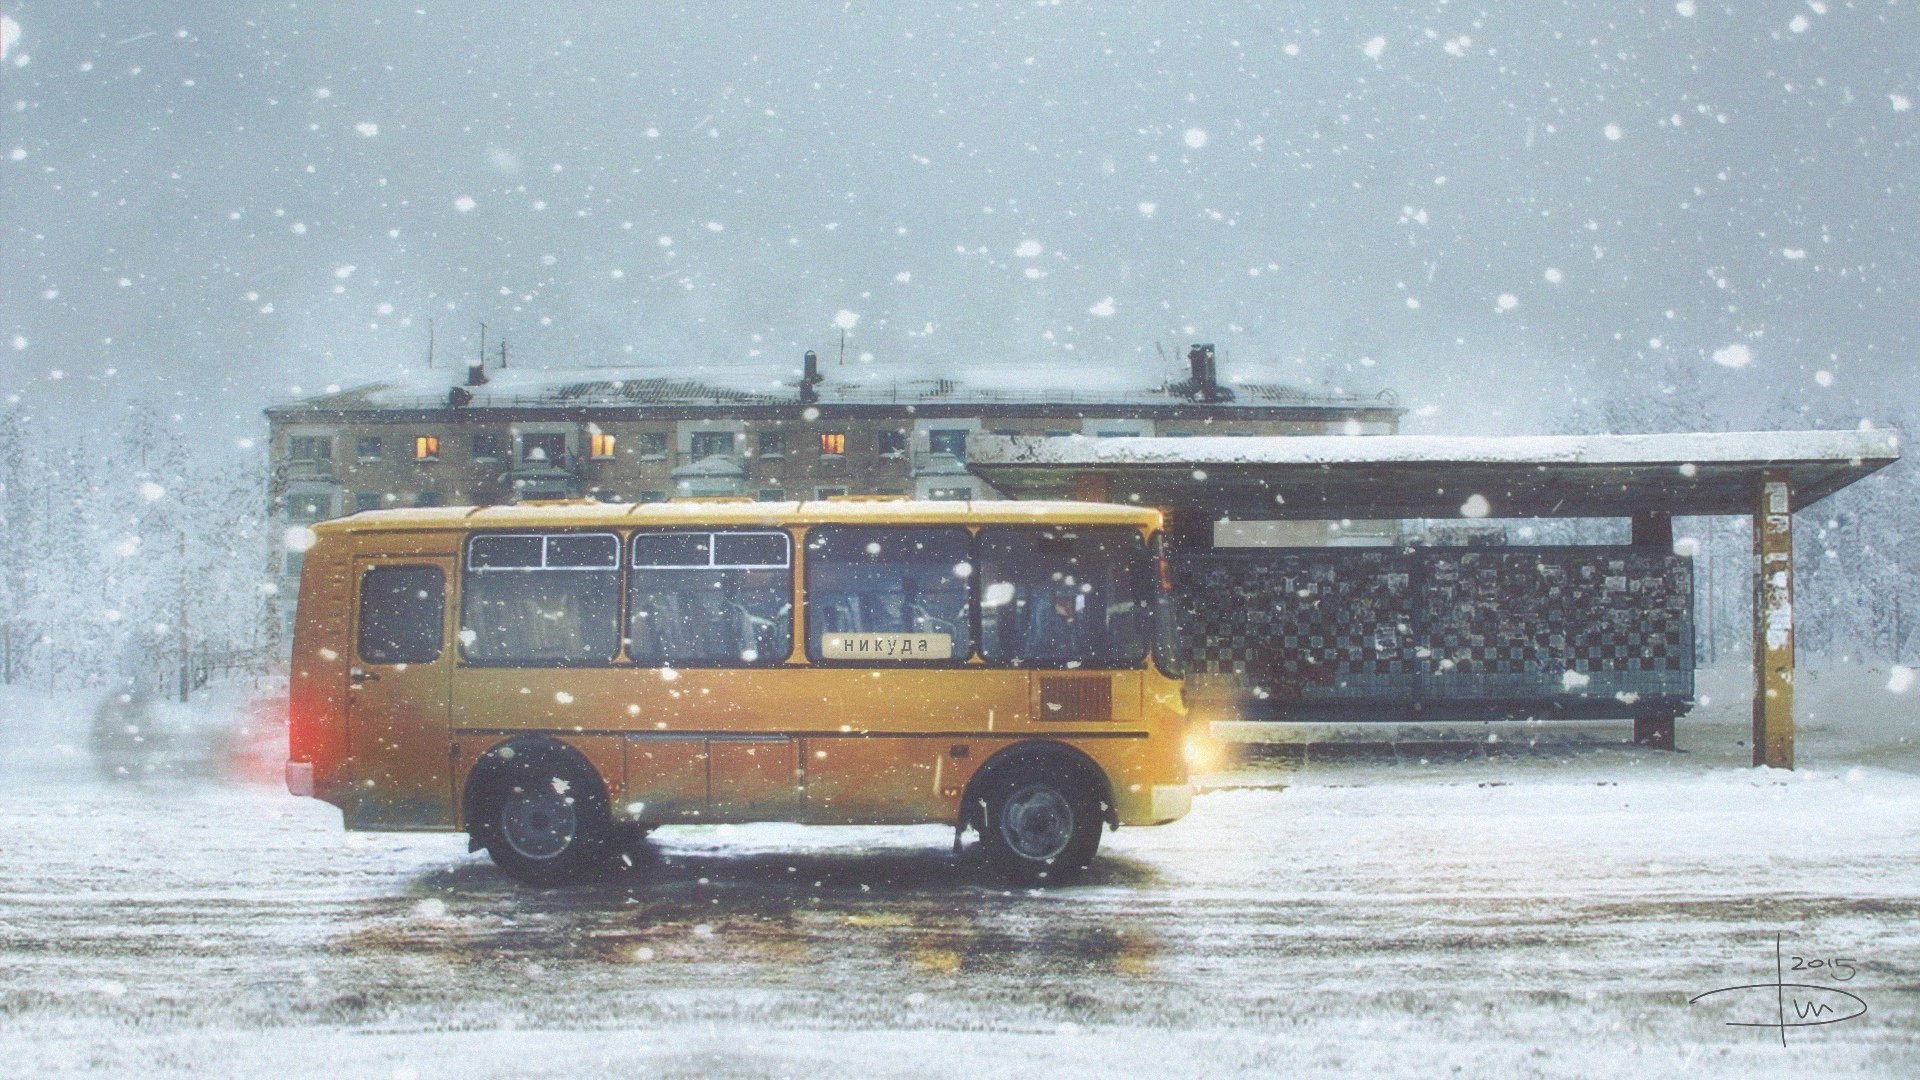 General 1920x1080 winter sadness alone snowflakes buses city road Russia vehicle digital art watermarked 2015 (Year)